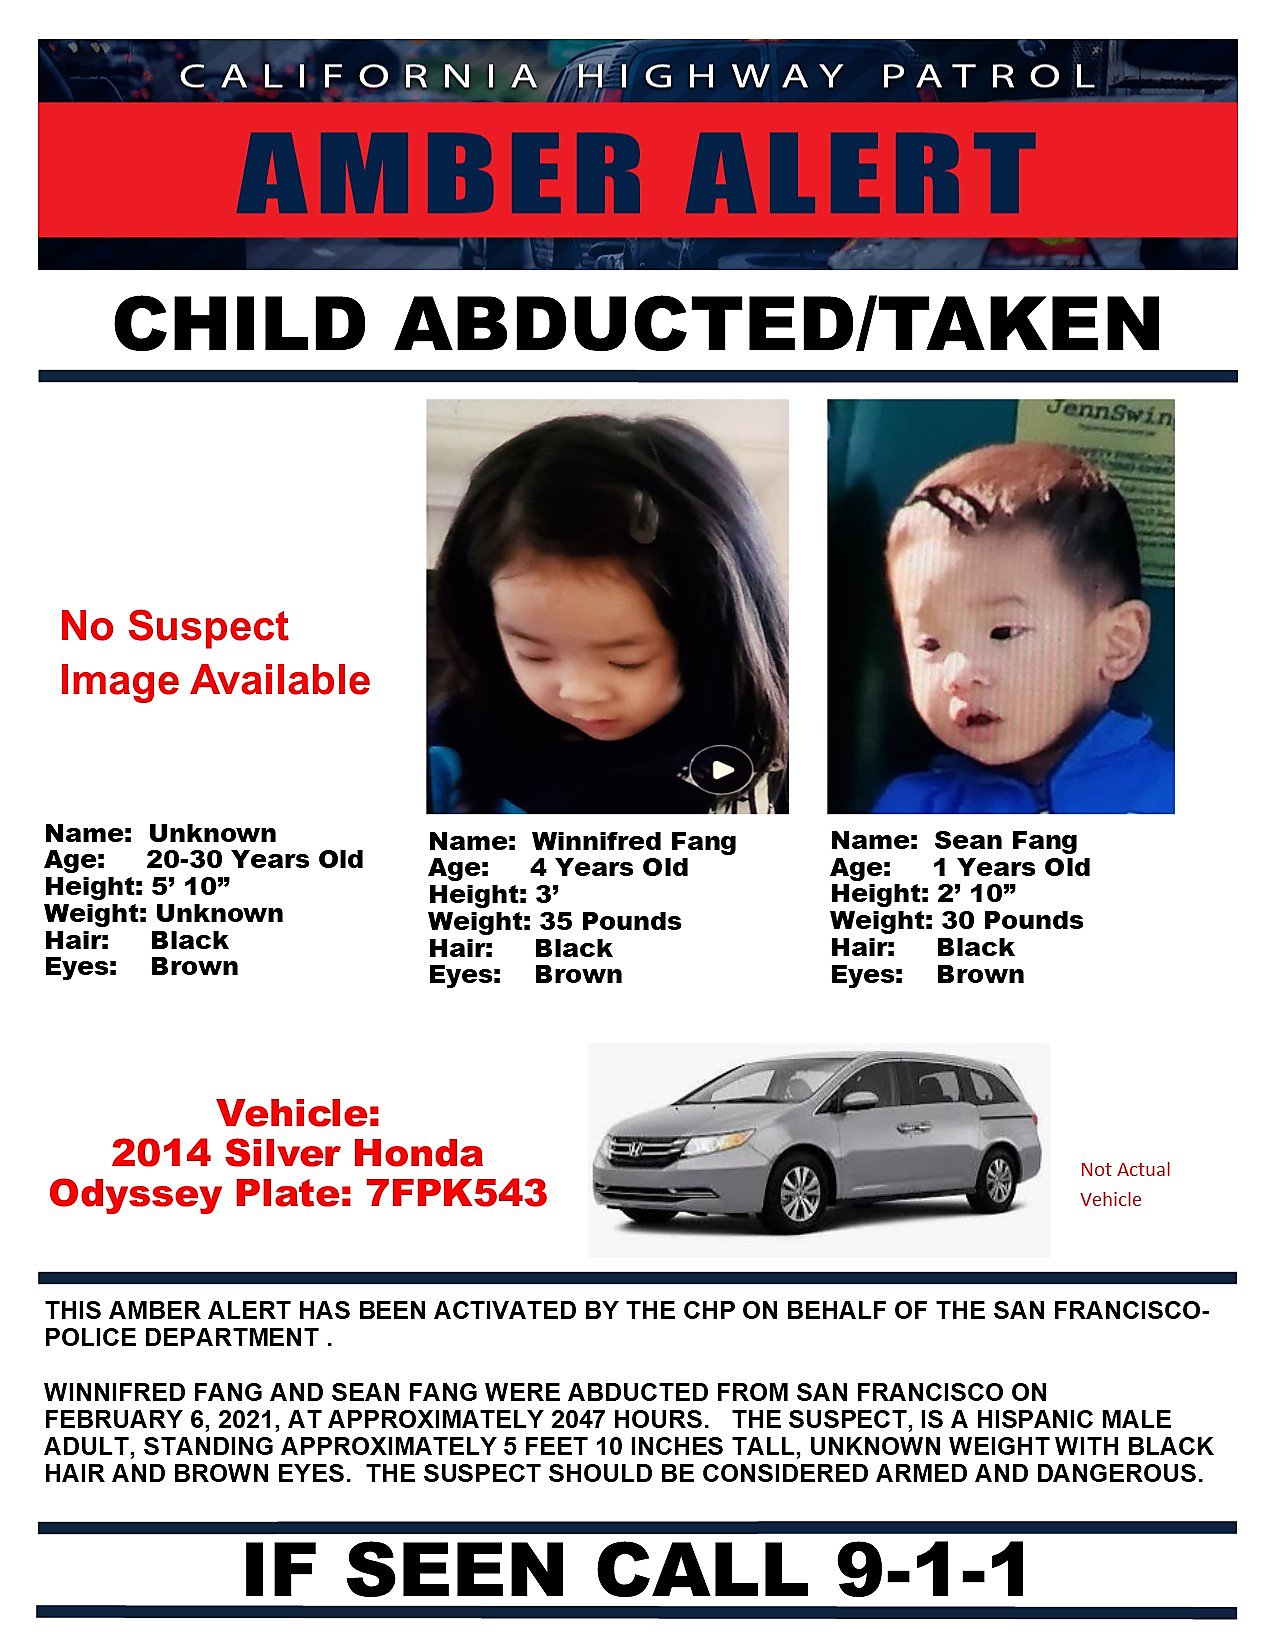 Man who left with 2 children in a stolen minivan in SF remains at large